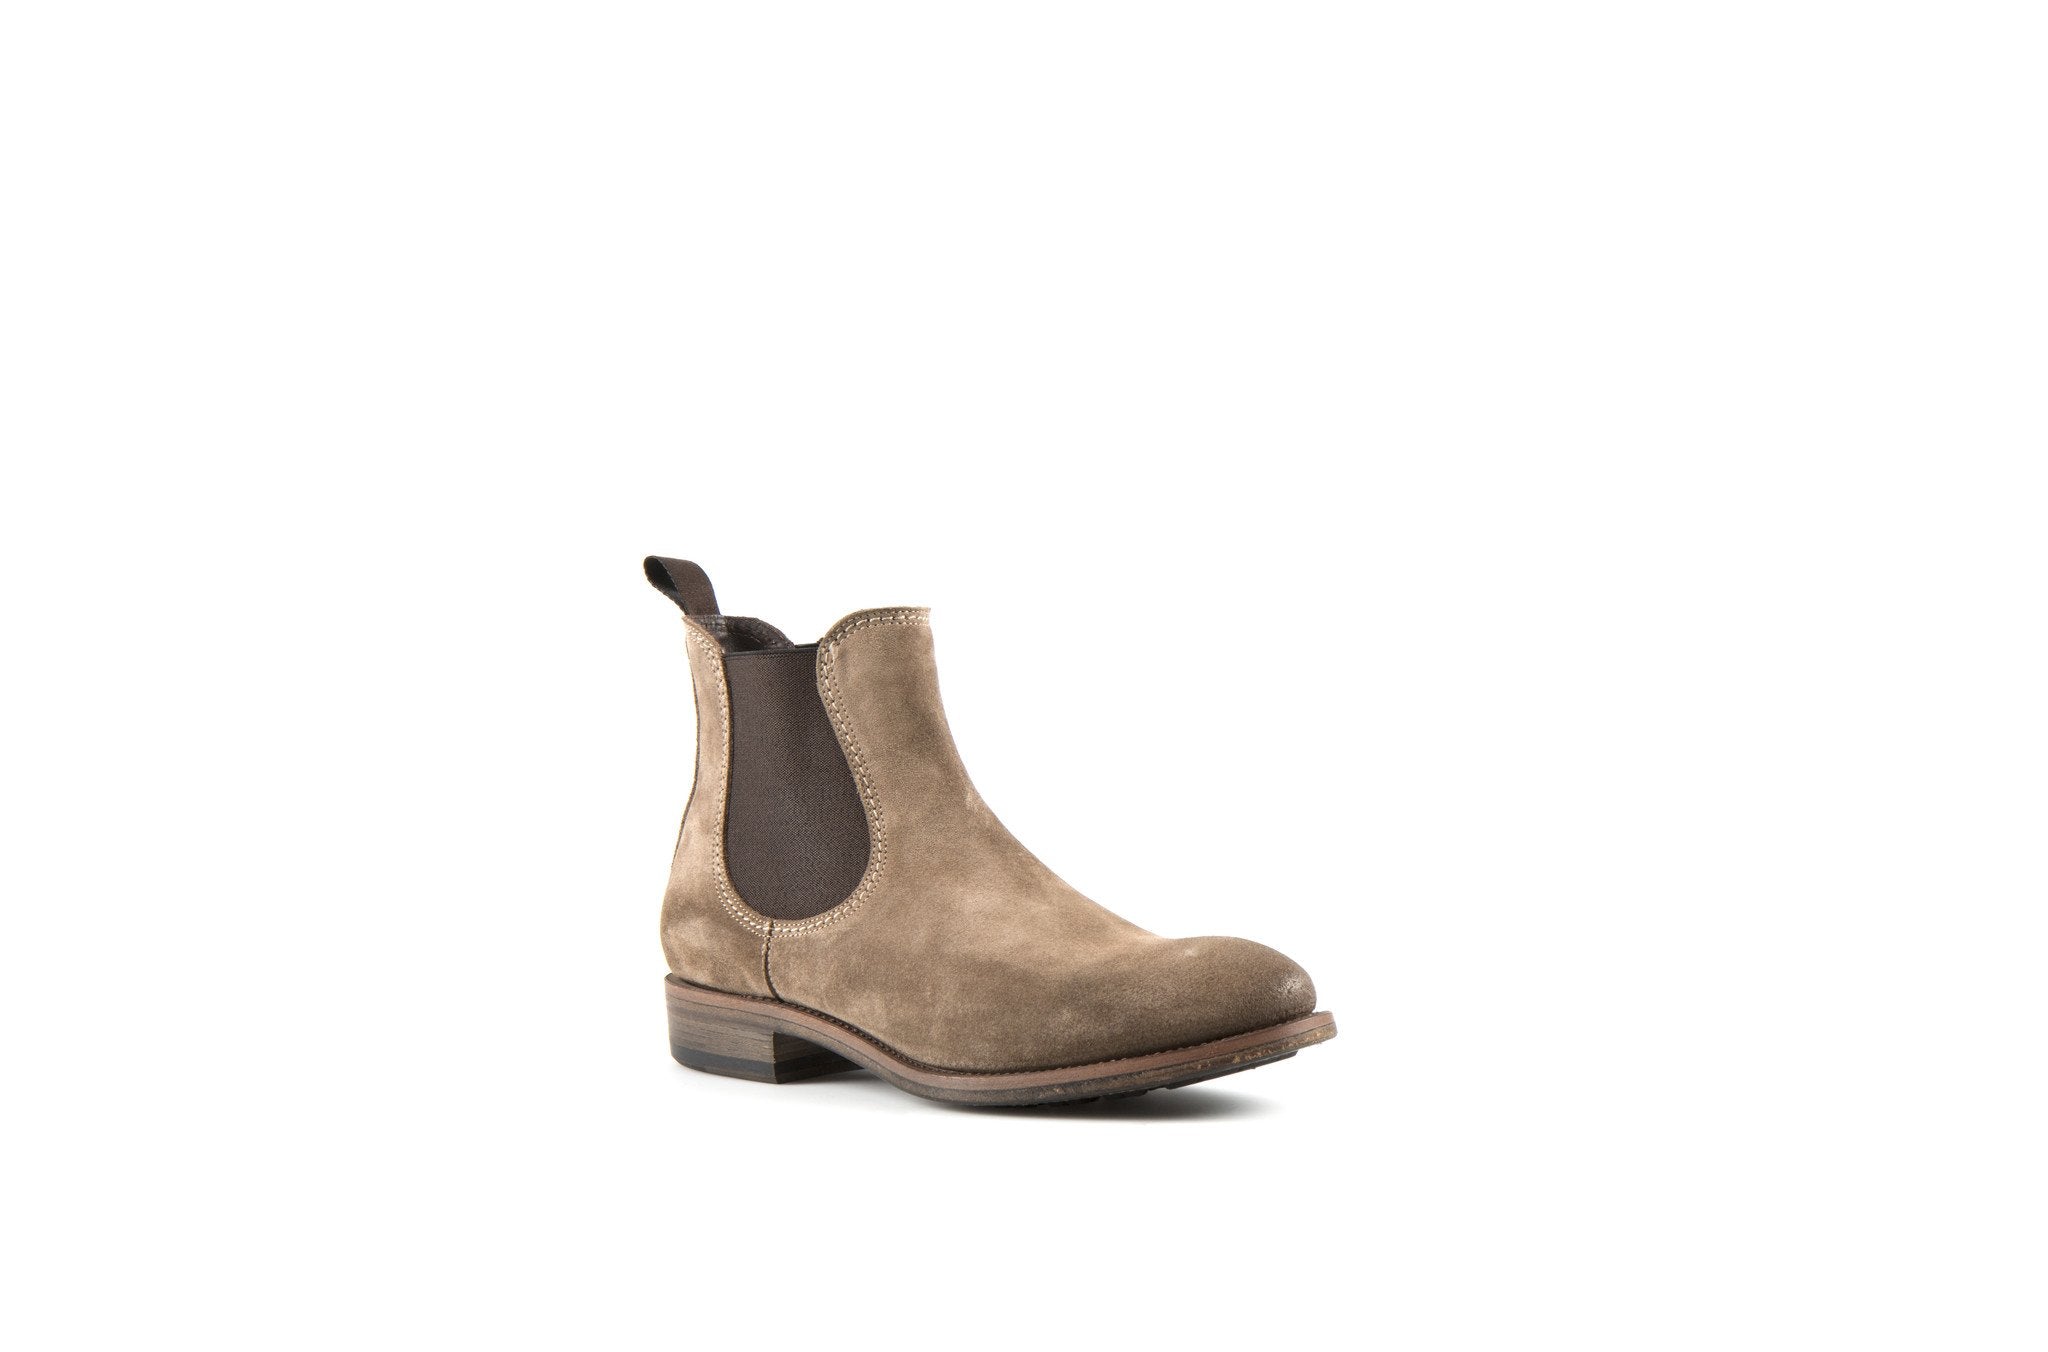 Hanoi Sand Suede Leather Chelsea Boots